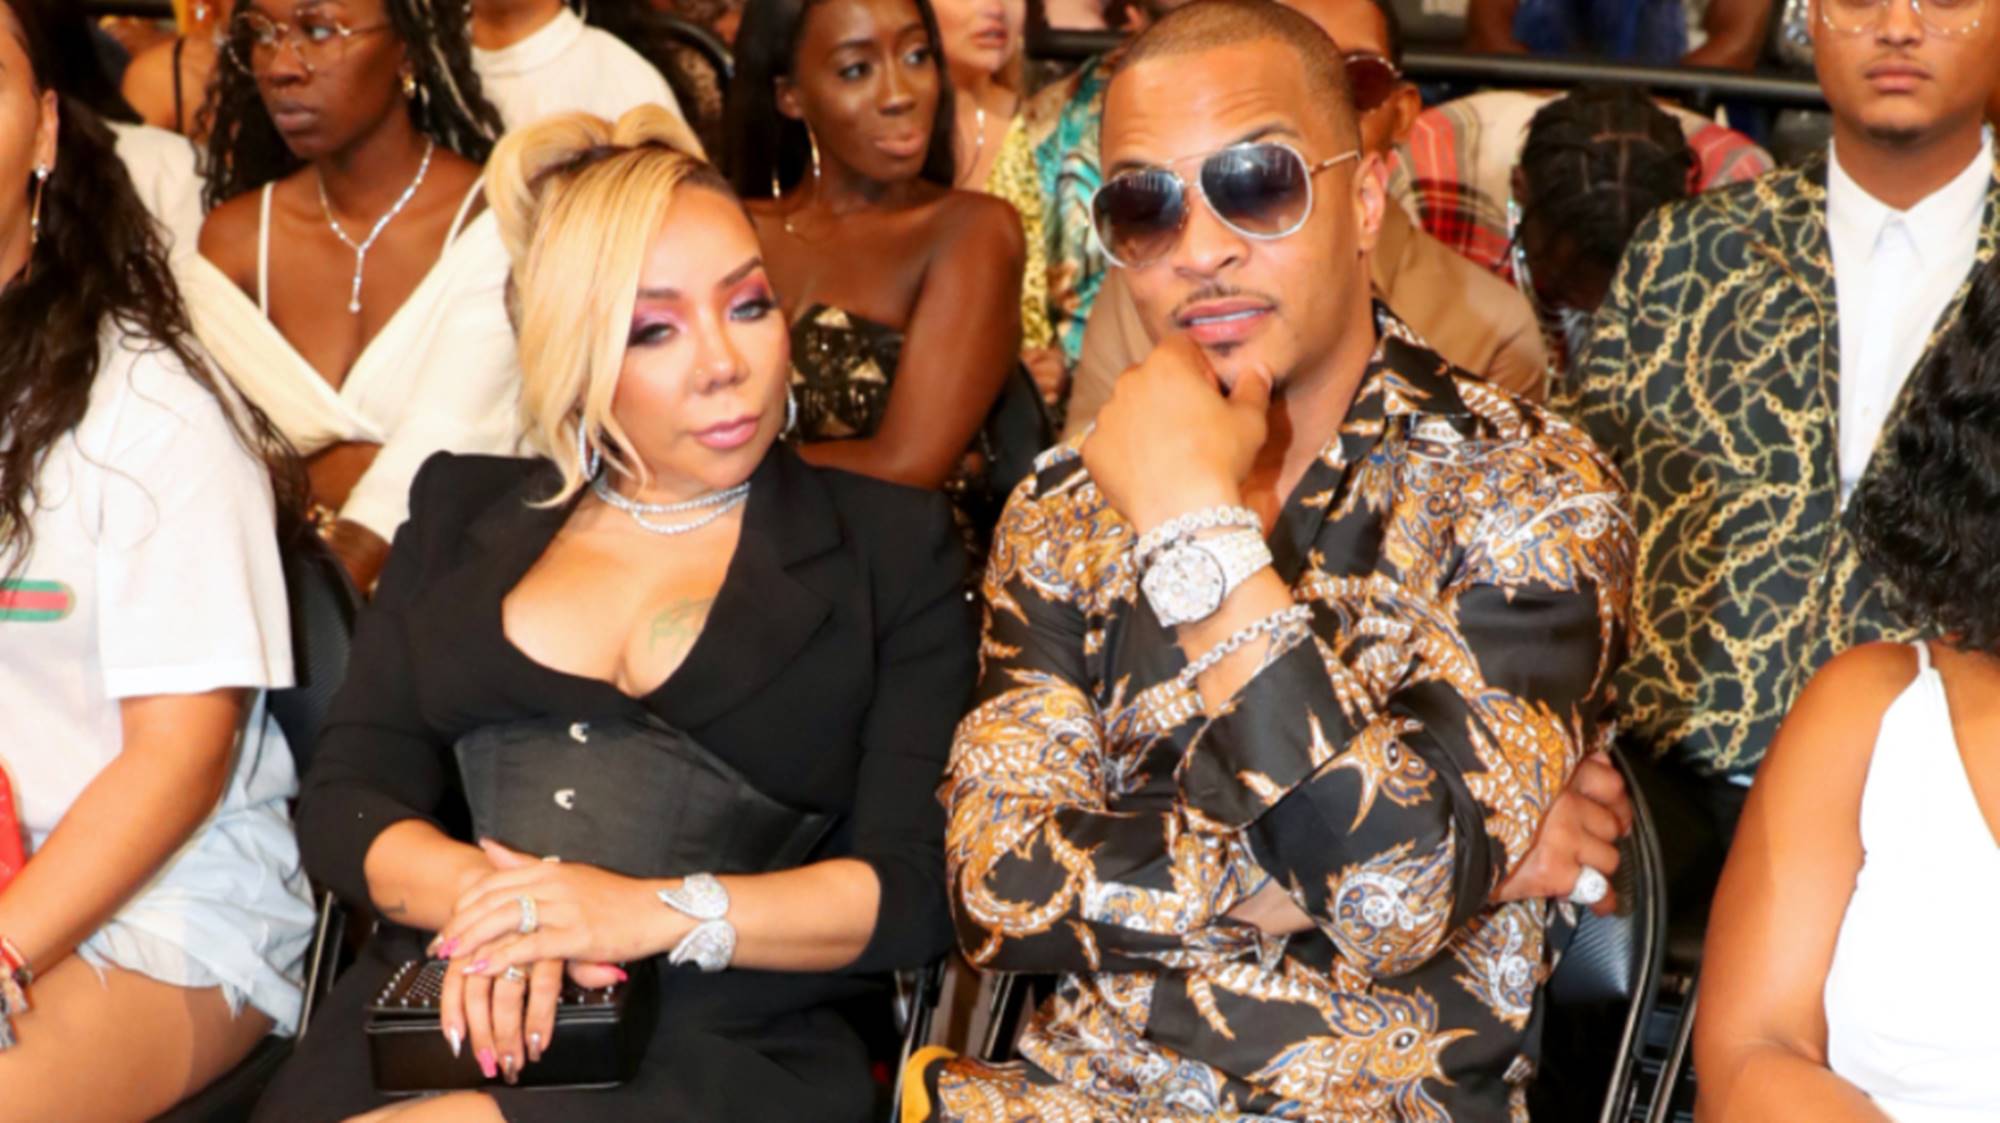 Tiny Harris And T.I. Have A Family Day Out With Their Kids At Candytopia